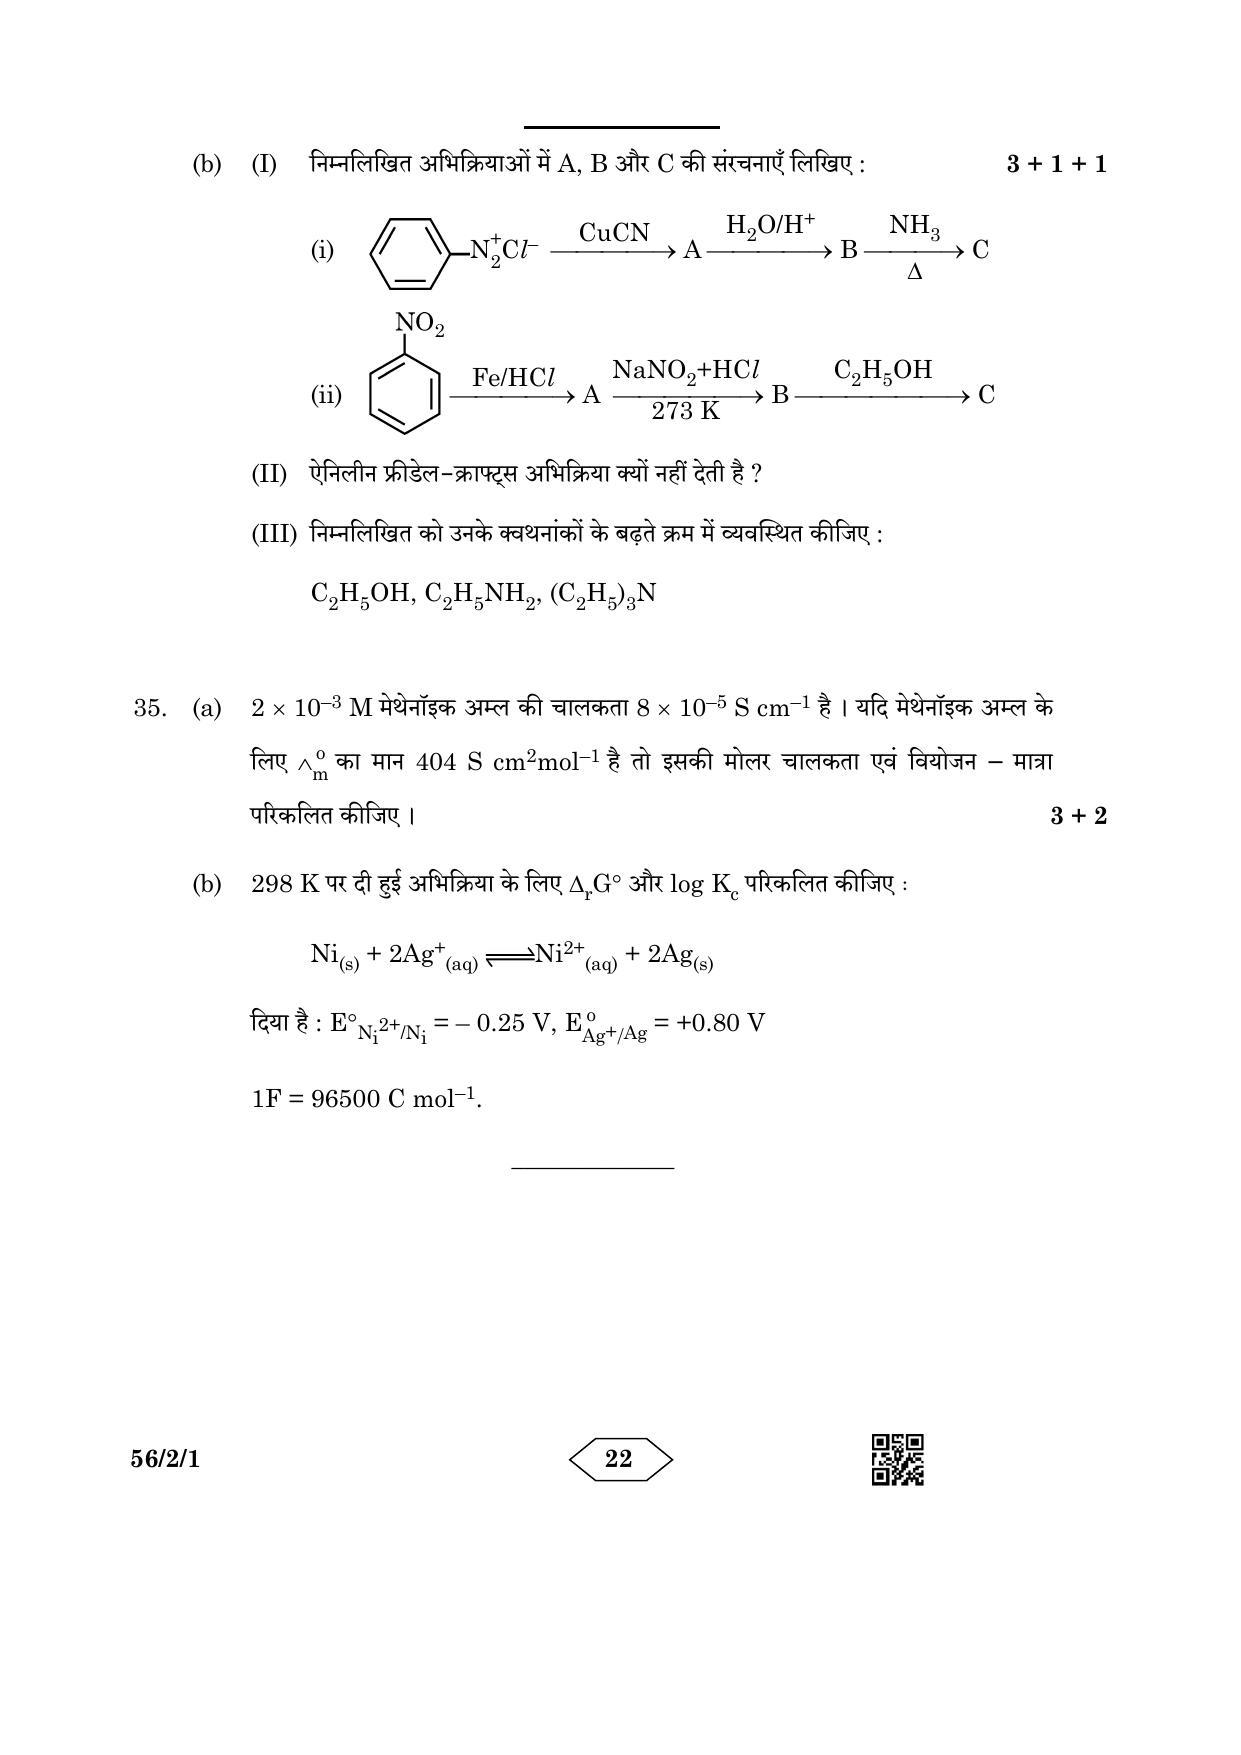 CBSE Class 12 56-2-1 Chemistry 2023 Question Paper - Page 22